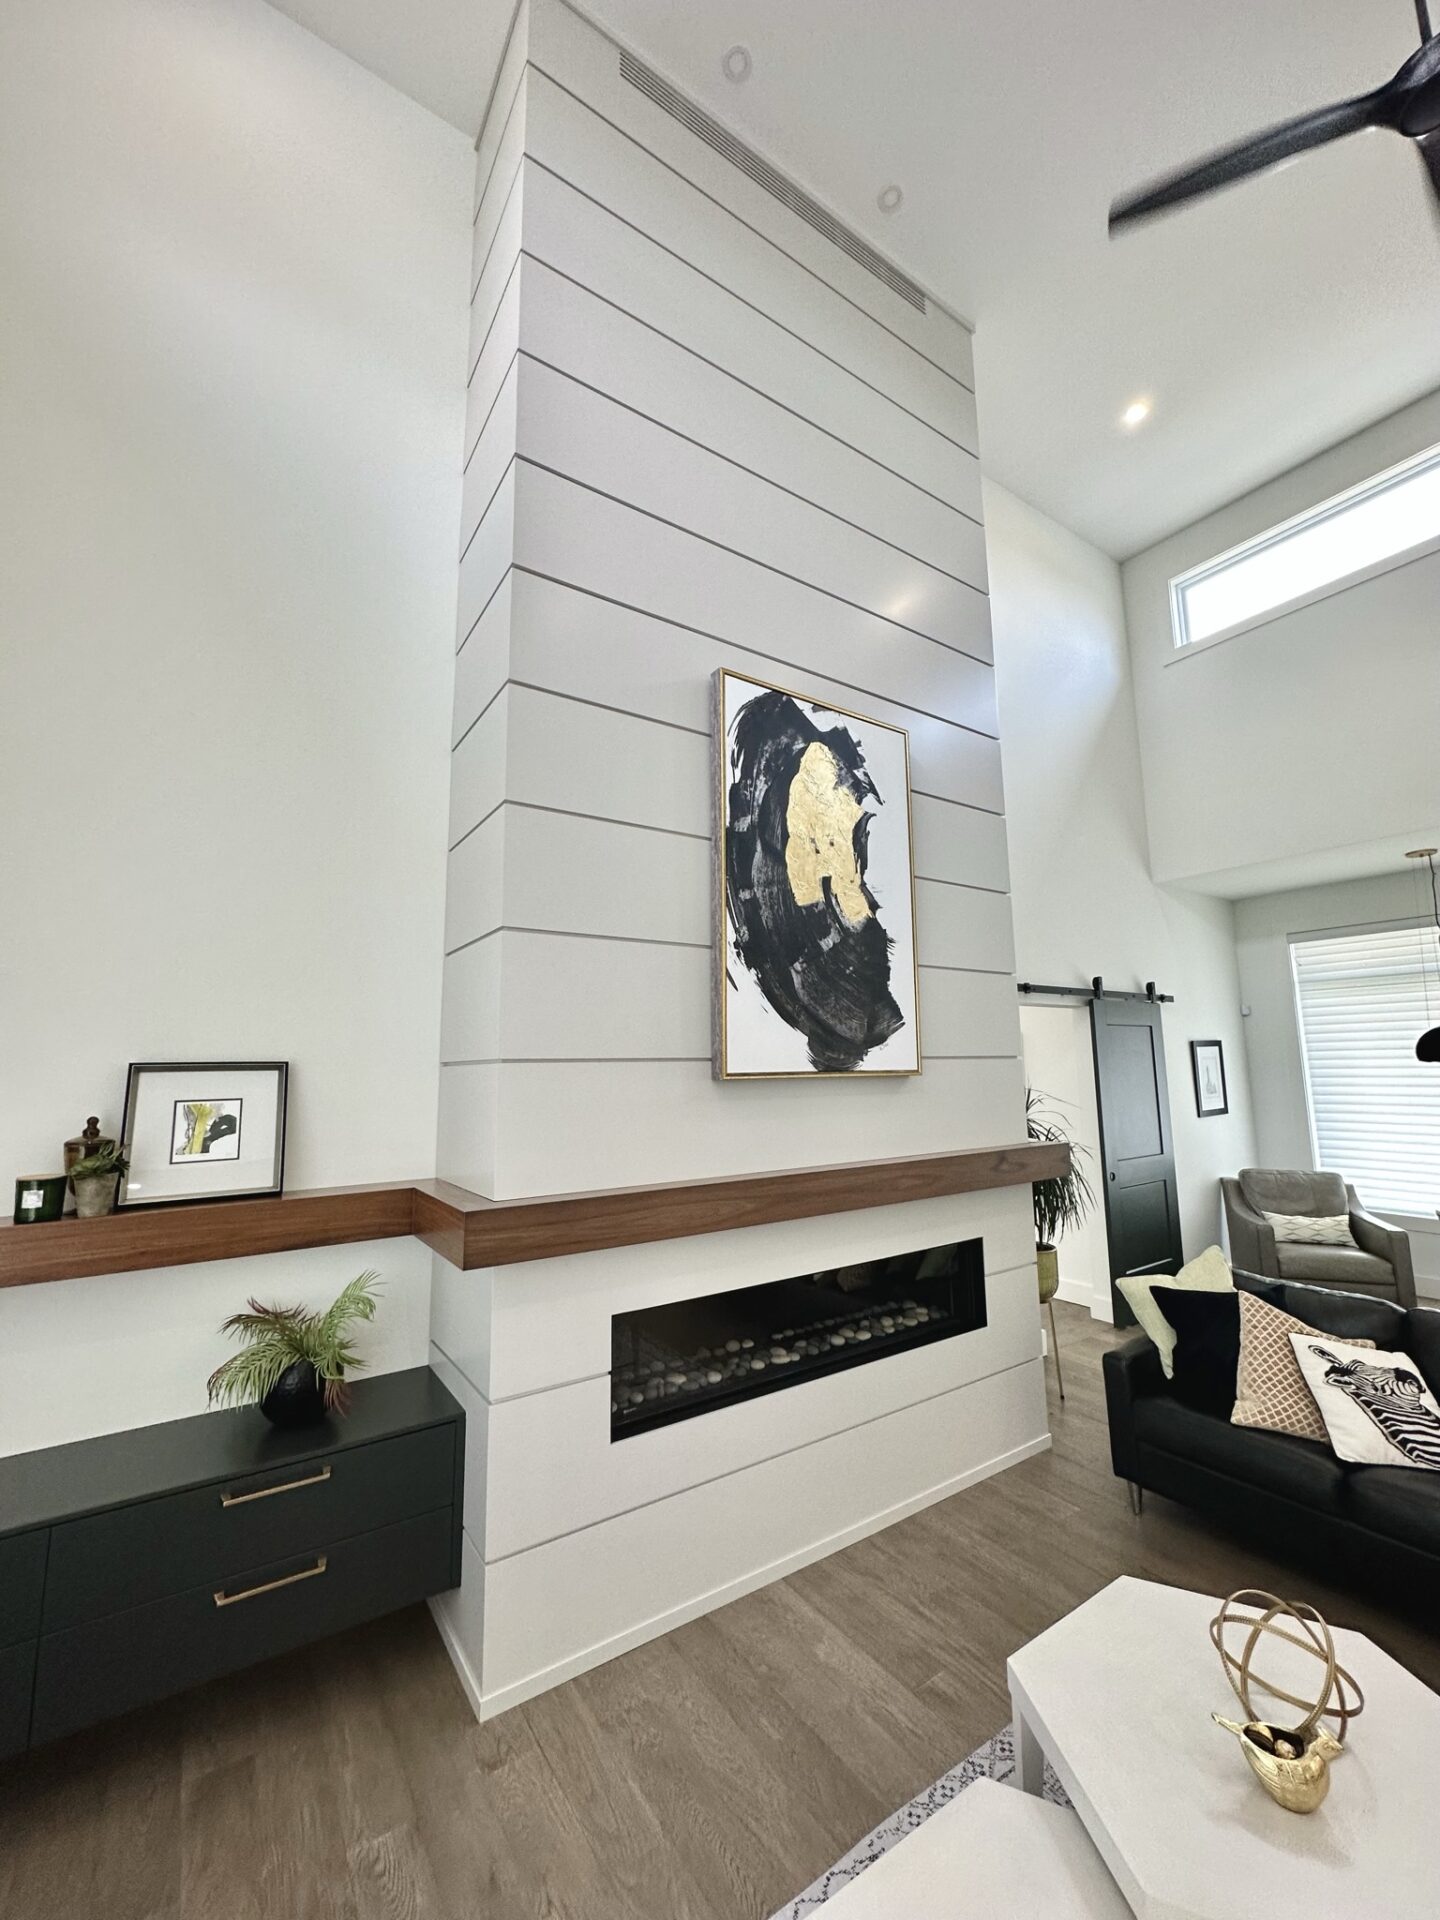 A modern living room featuring a sleek fireplace, shiplap wall with abstract art, dark furniture, decorative items, and an elegant ceiling fan.